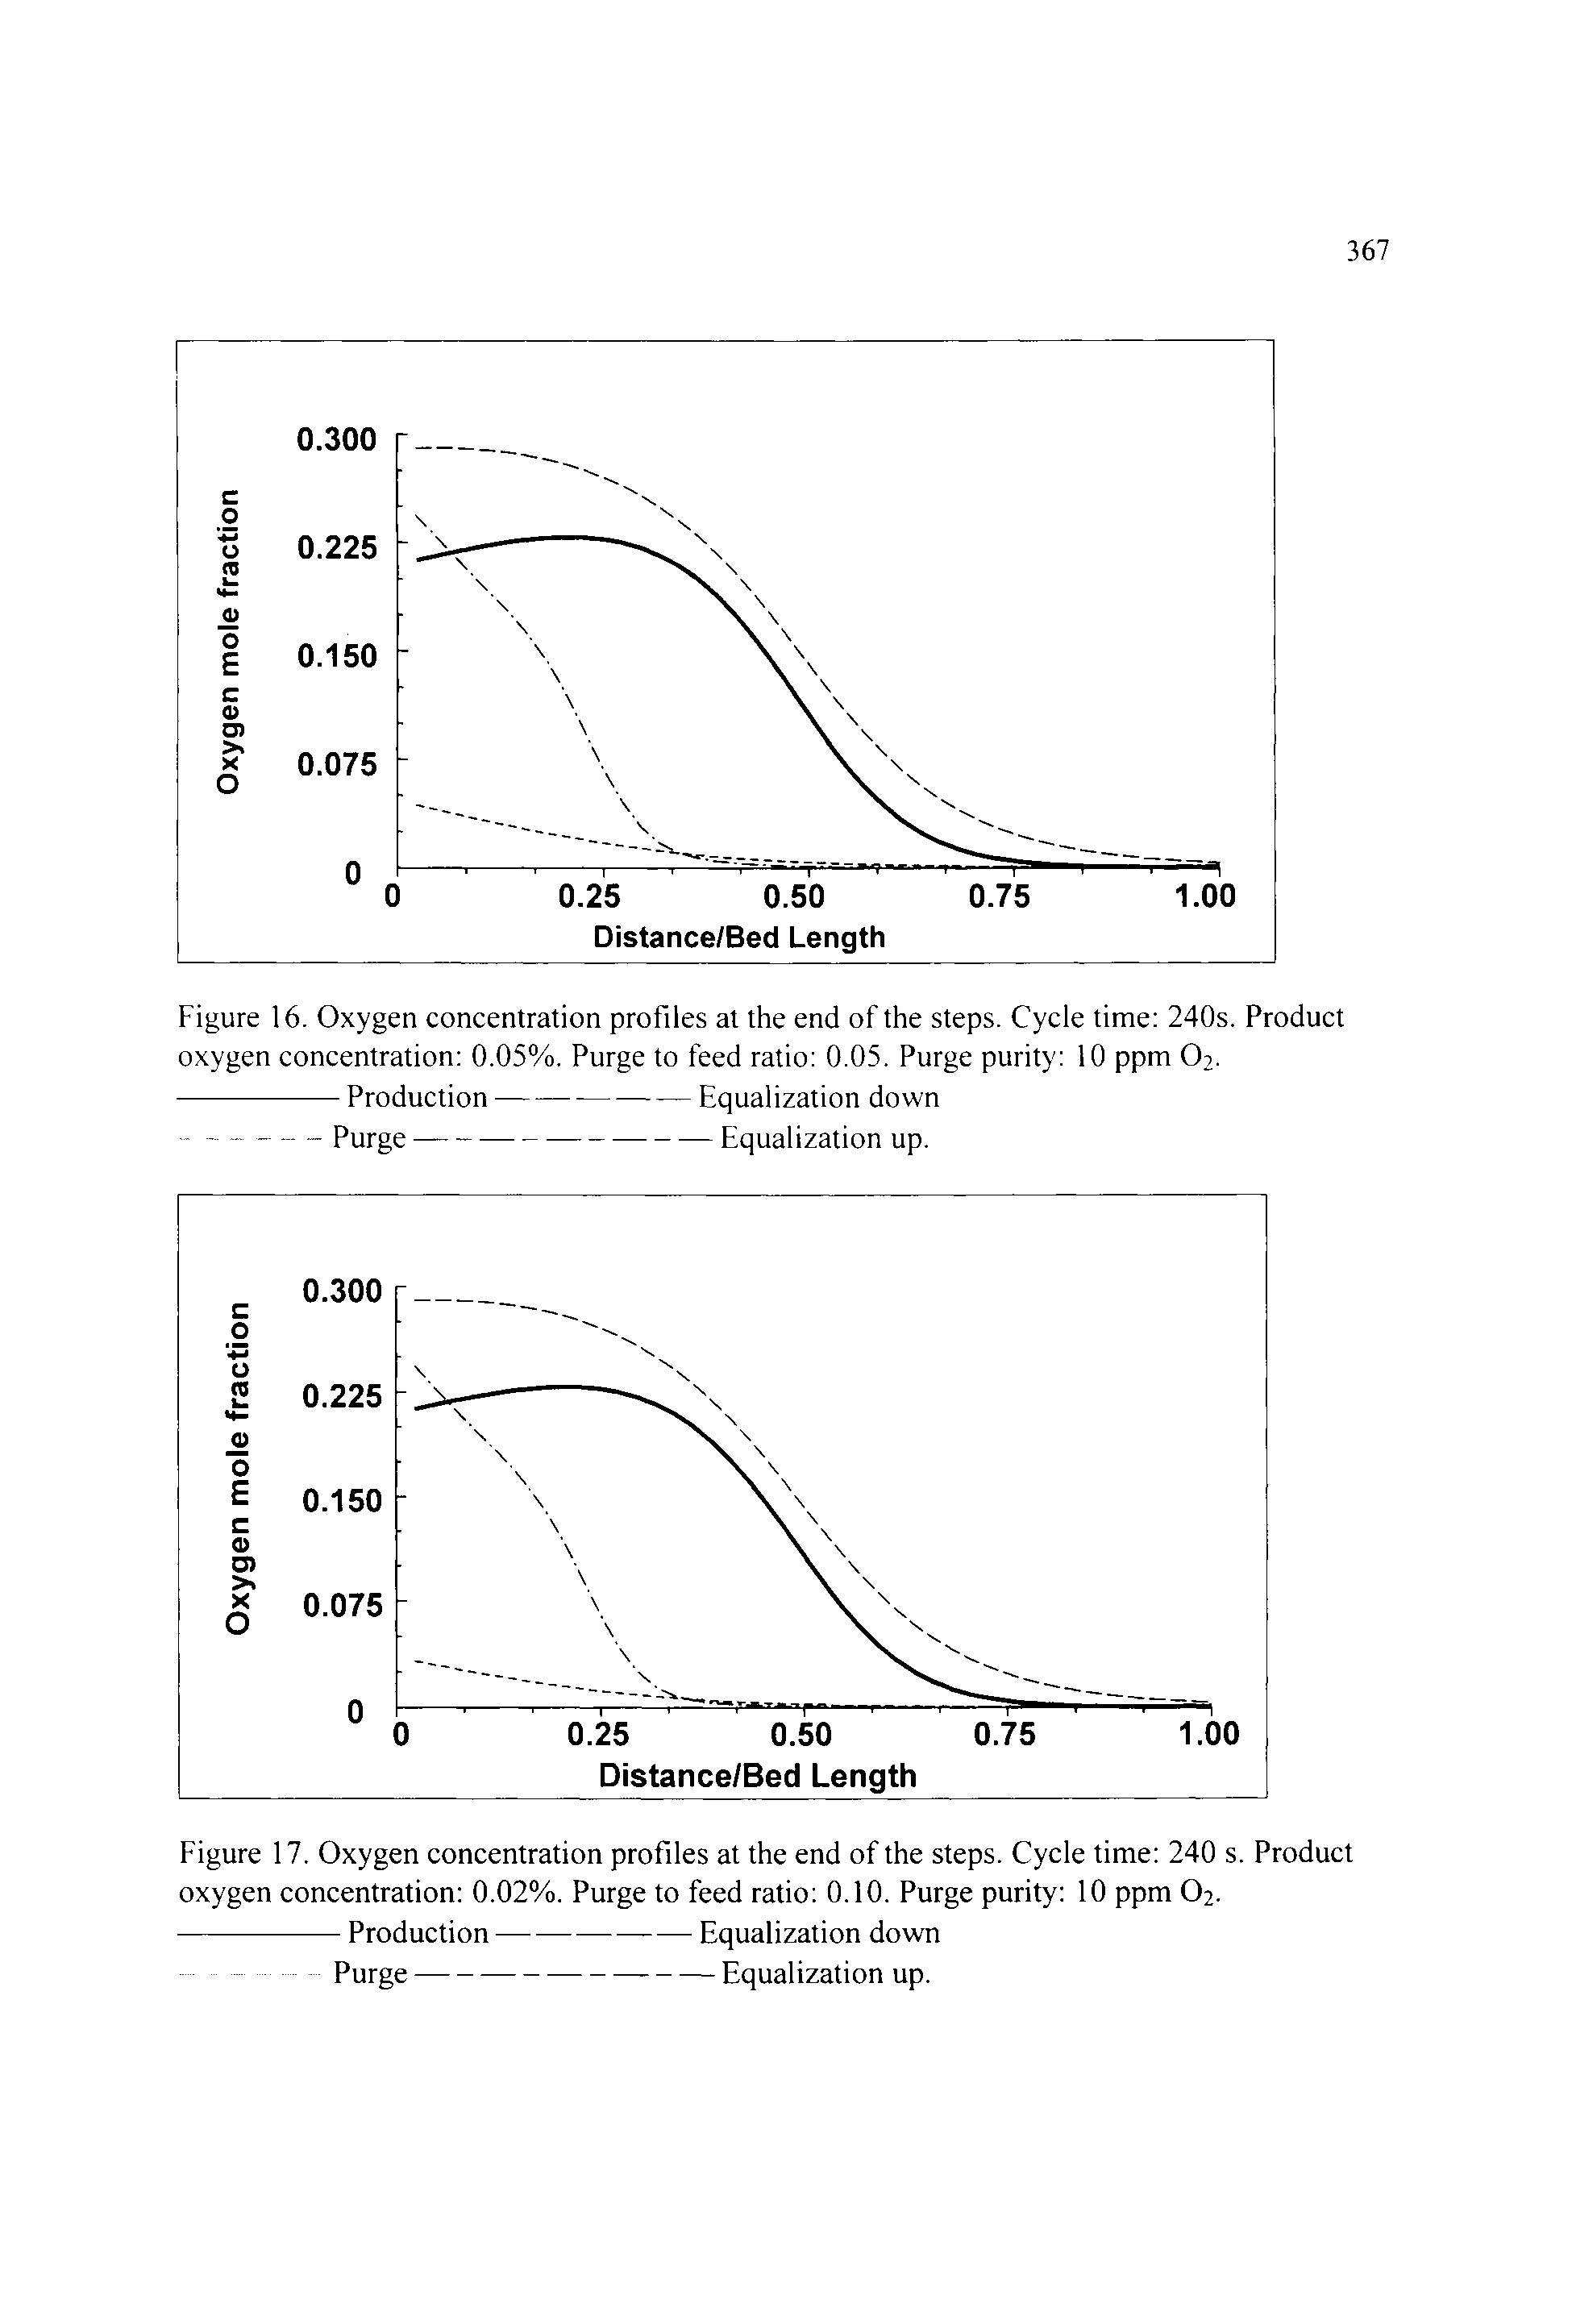 Figure 16. Oxygen concentration profiles at the end of the steps. Cycle time 240s. Product oxygen concentration 0.05%. Purge to feed ratio 0.05. Purge purity 10 ppm O2.